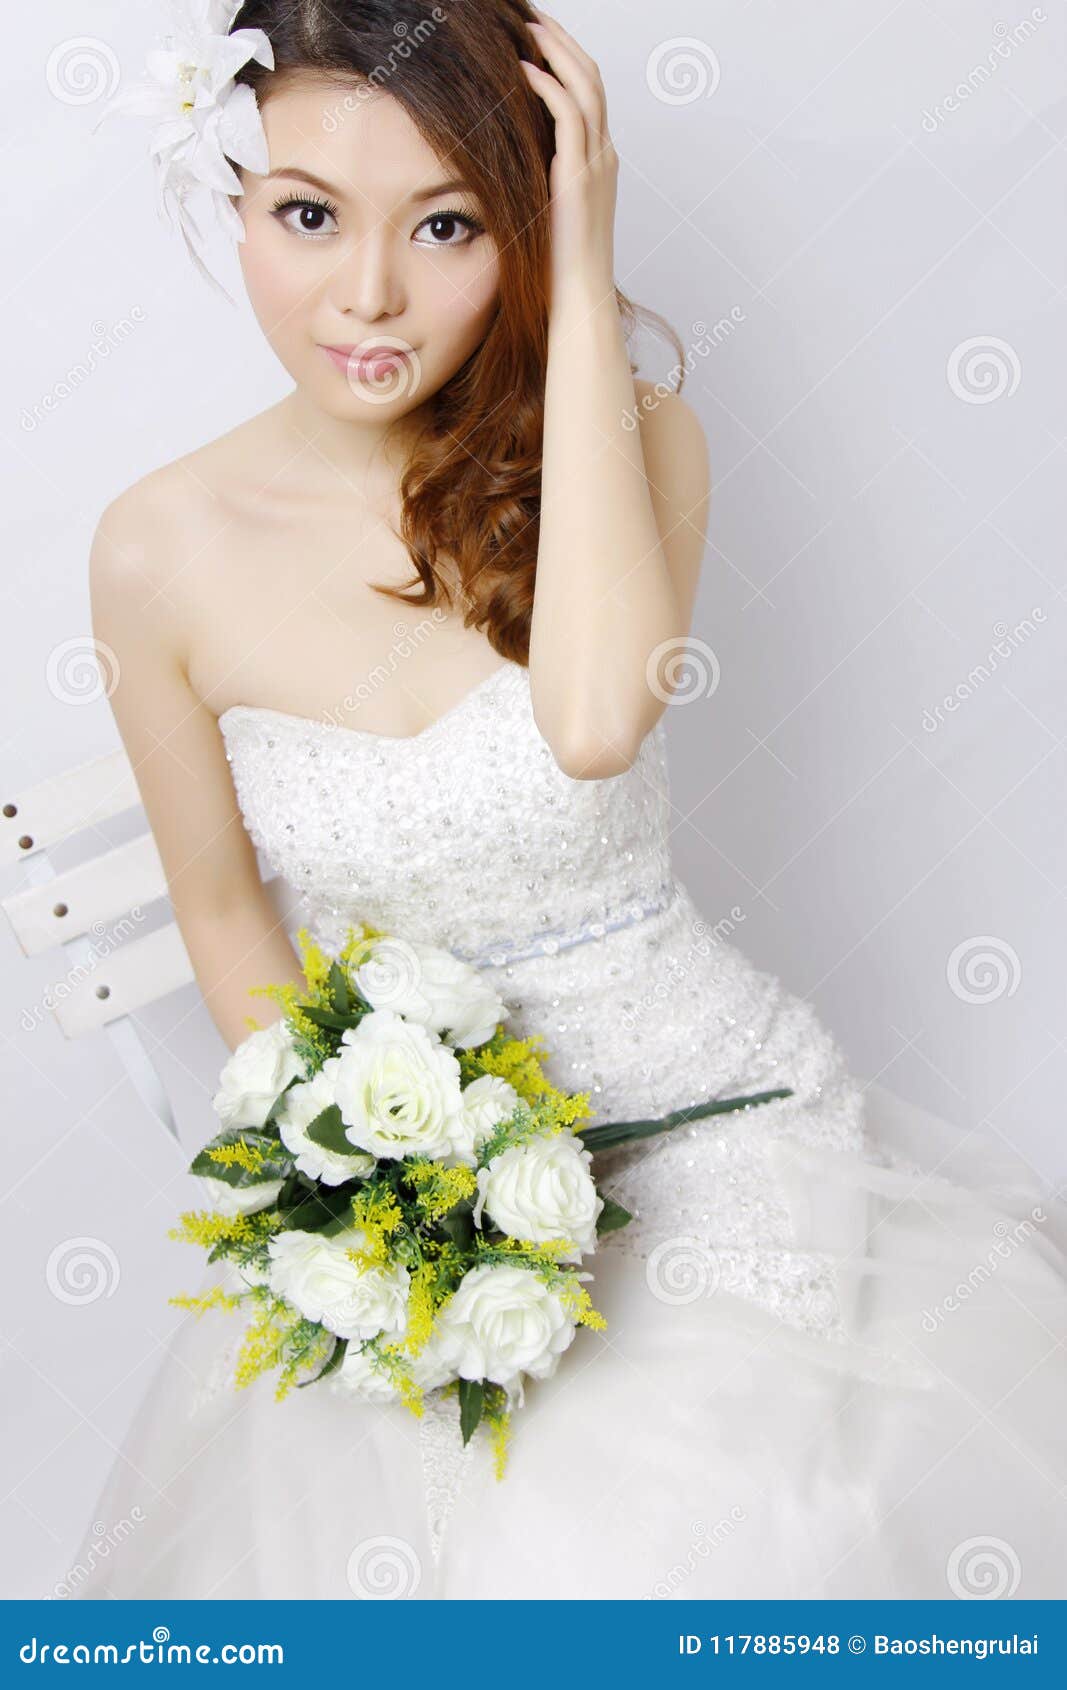 https://thumbs.dreamstime.com/z/lovely-asian-bride-light-make-up-young-beautiful-bride-stylish-make-up-hairdo-over-white-background-117885948.jpg